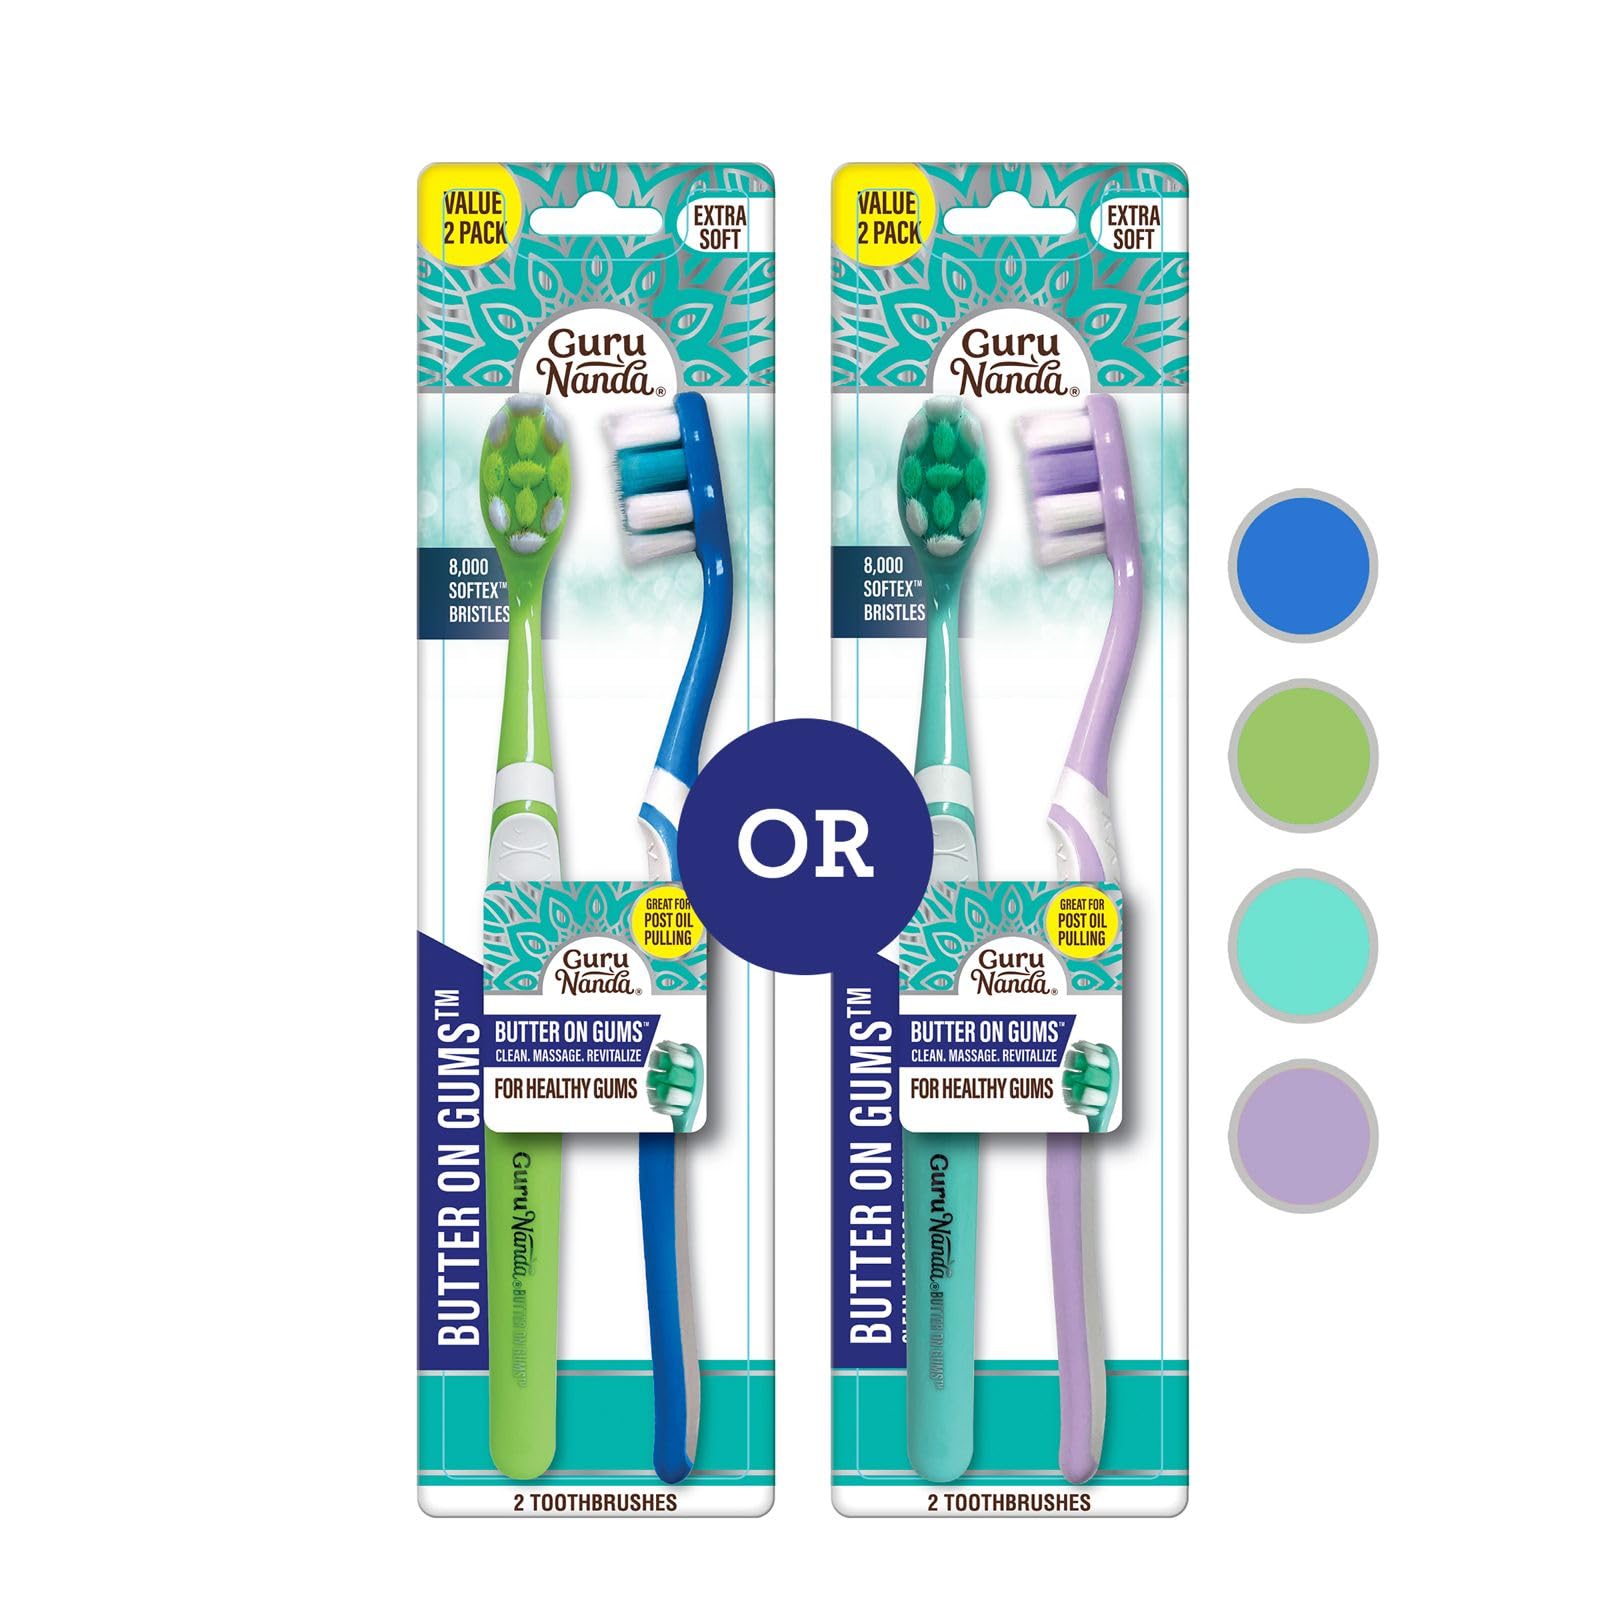 GuruNanda Butter on Gums Toothbrush with Extra Soft Bristles for Sensitive Gums, Soft Toothbrush for Kids & Adults, 2 ct